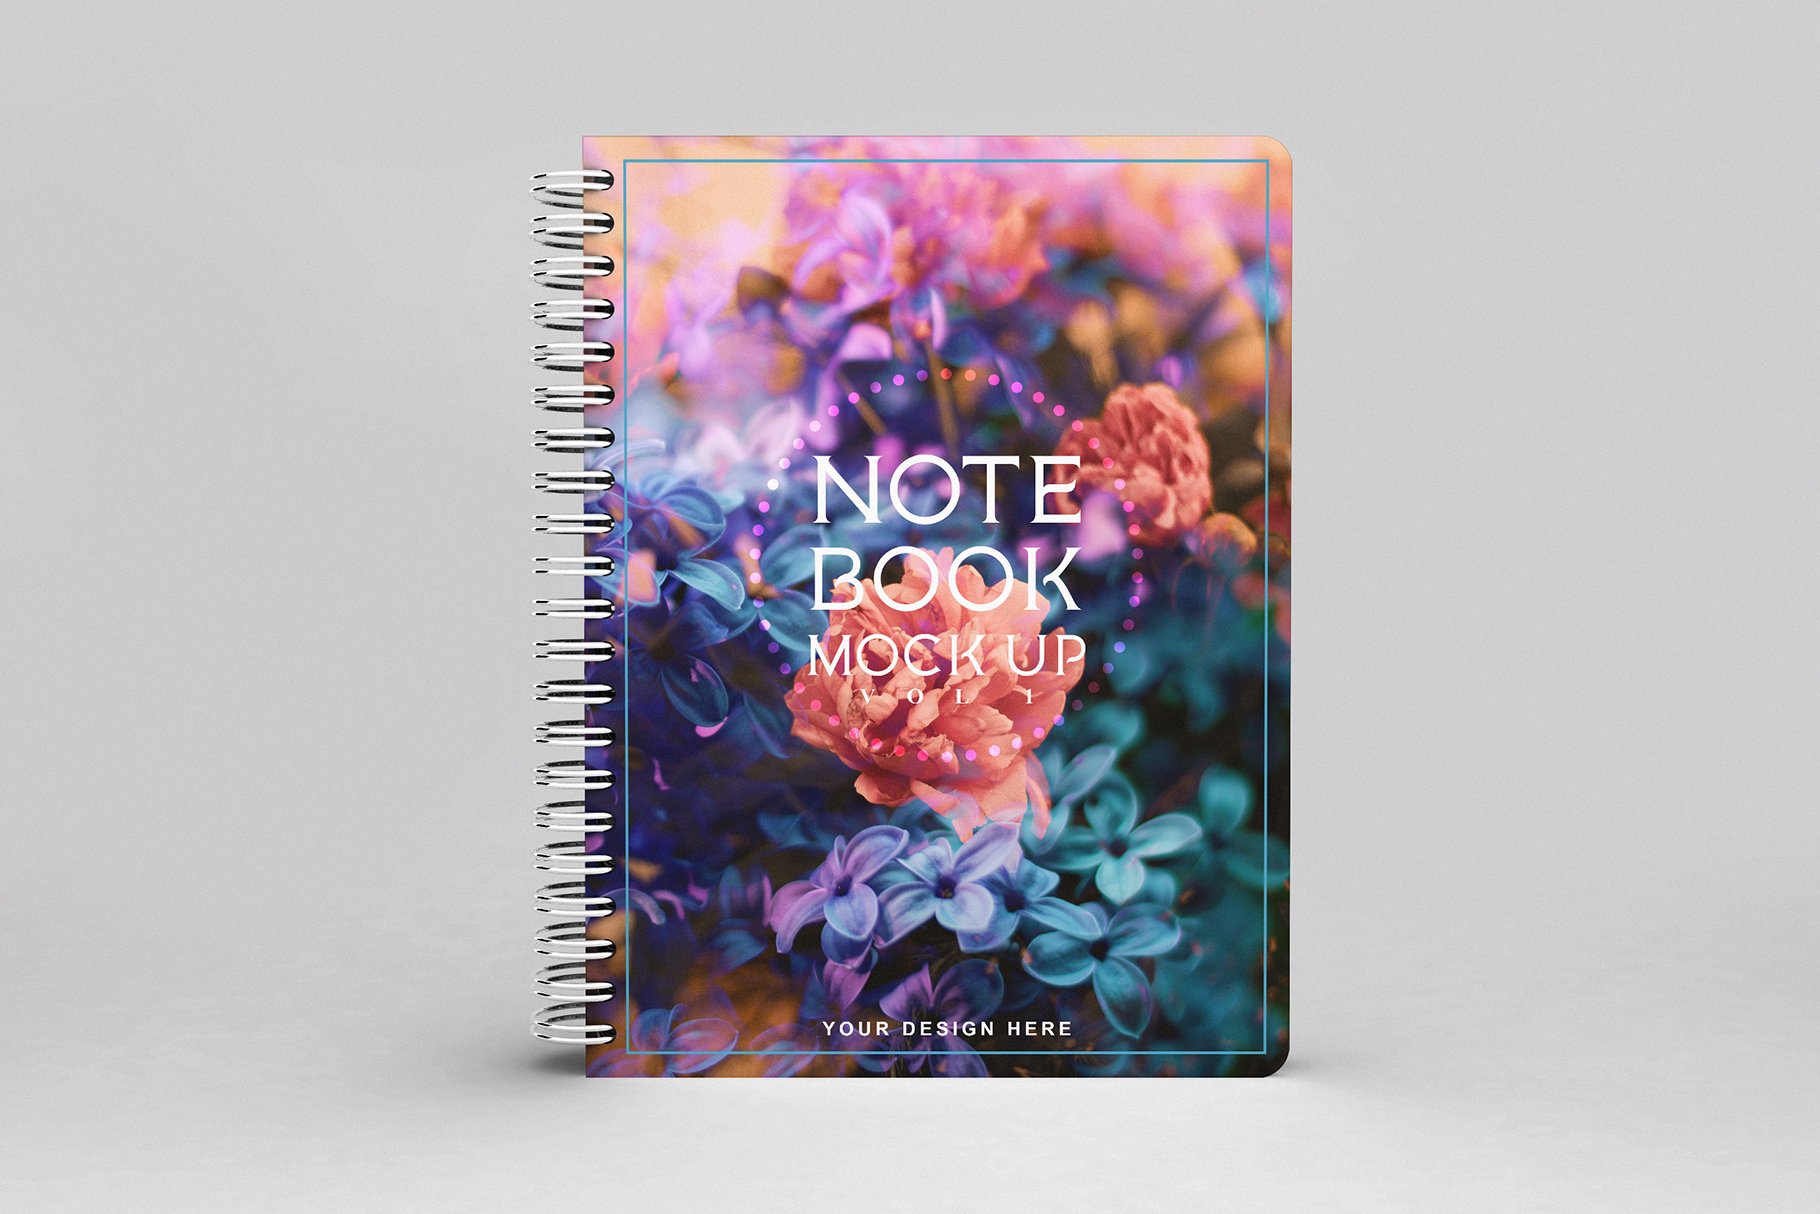 So blossom cover book with multicolor abstract illustration.